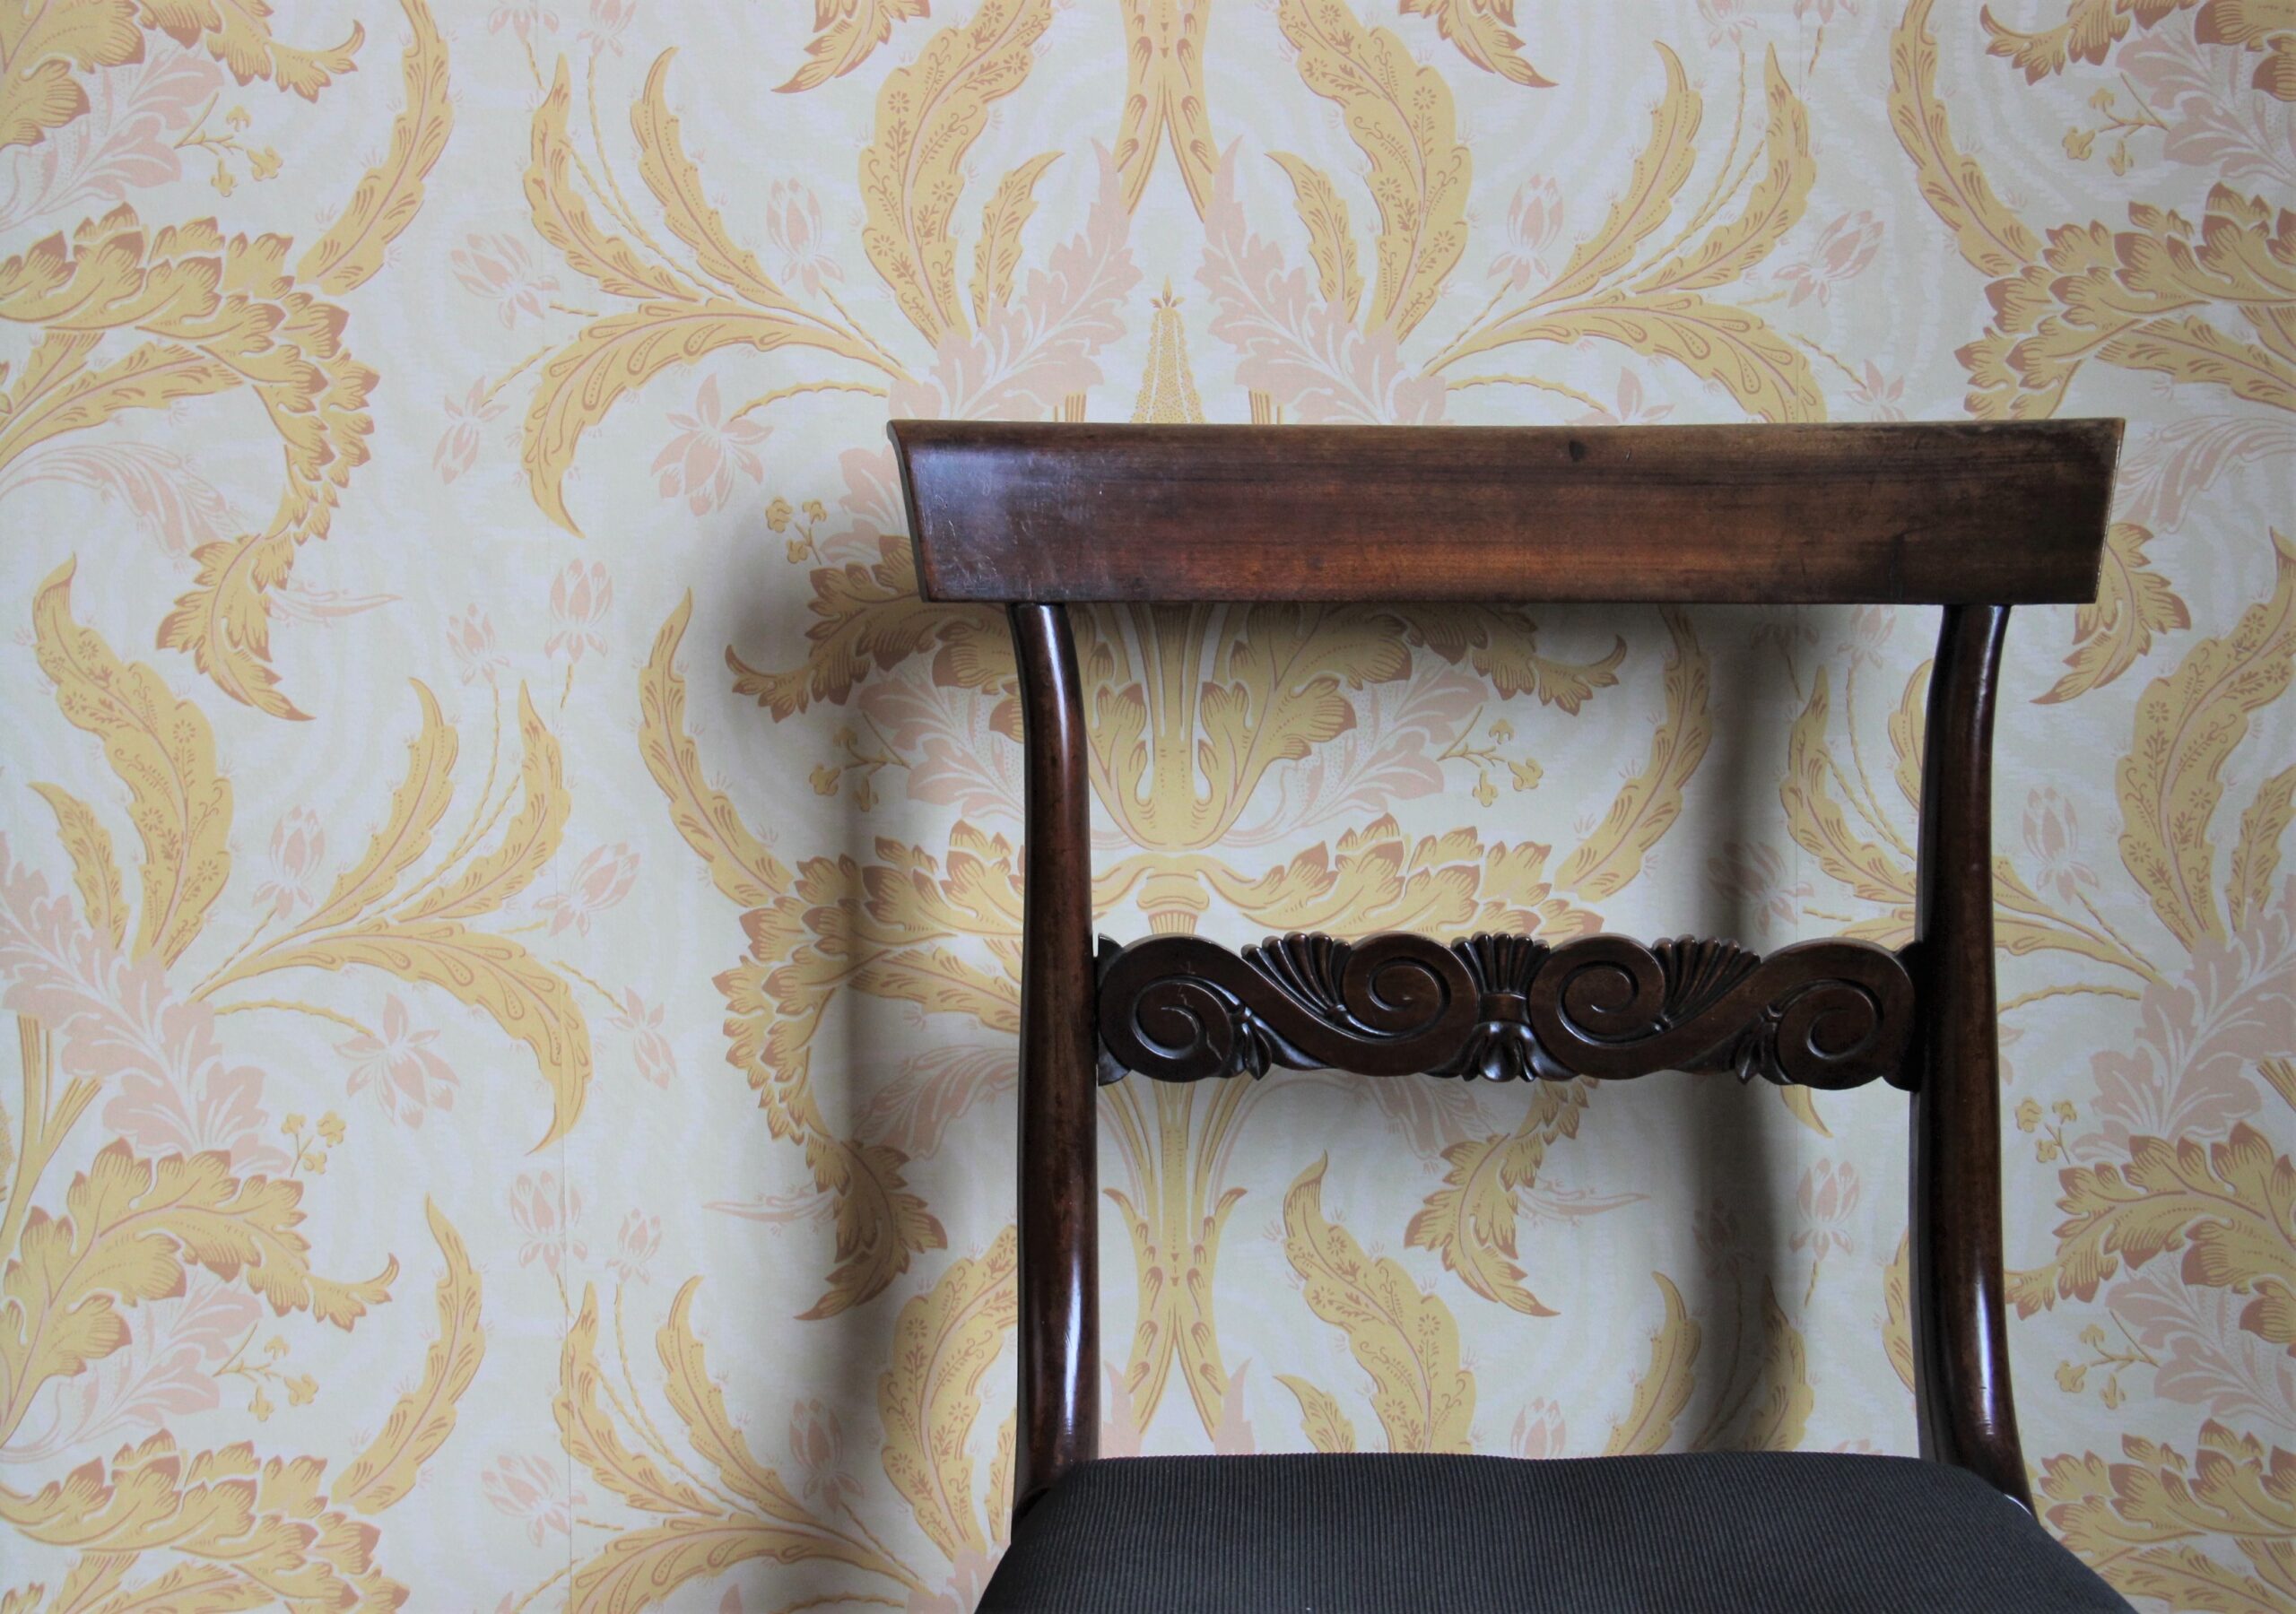 Traditional Irish Wallpaper and wooden chair on the foreground